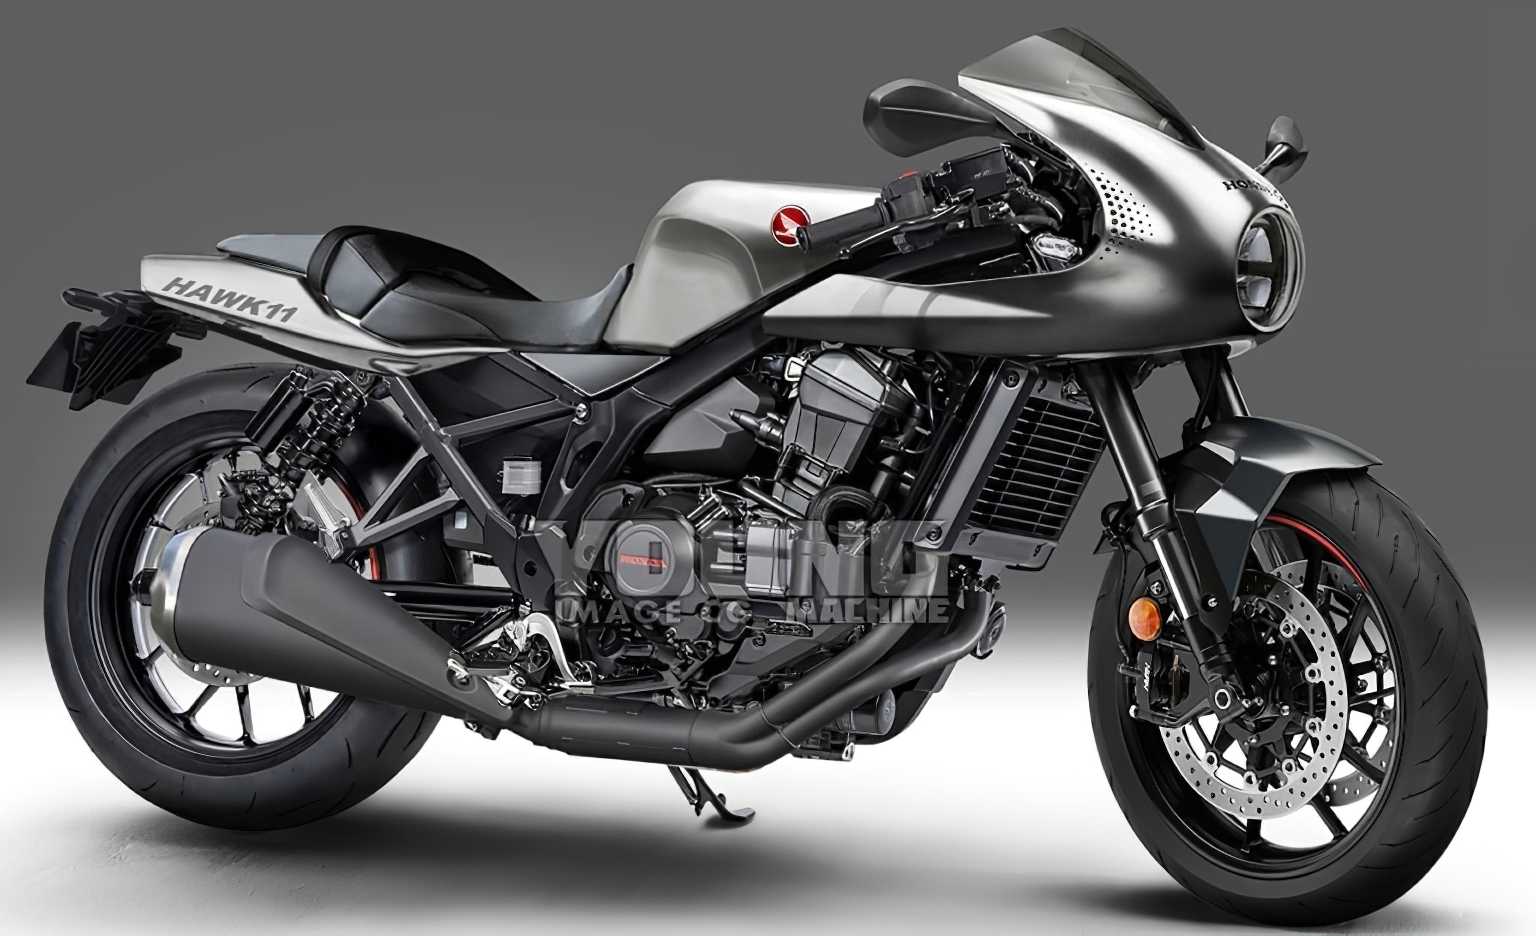 Return of the Honda Hawk?
- also in the MOTORCYCLES.NEWS APP